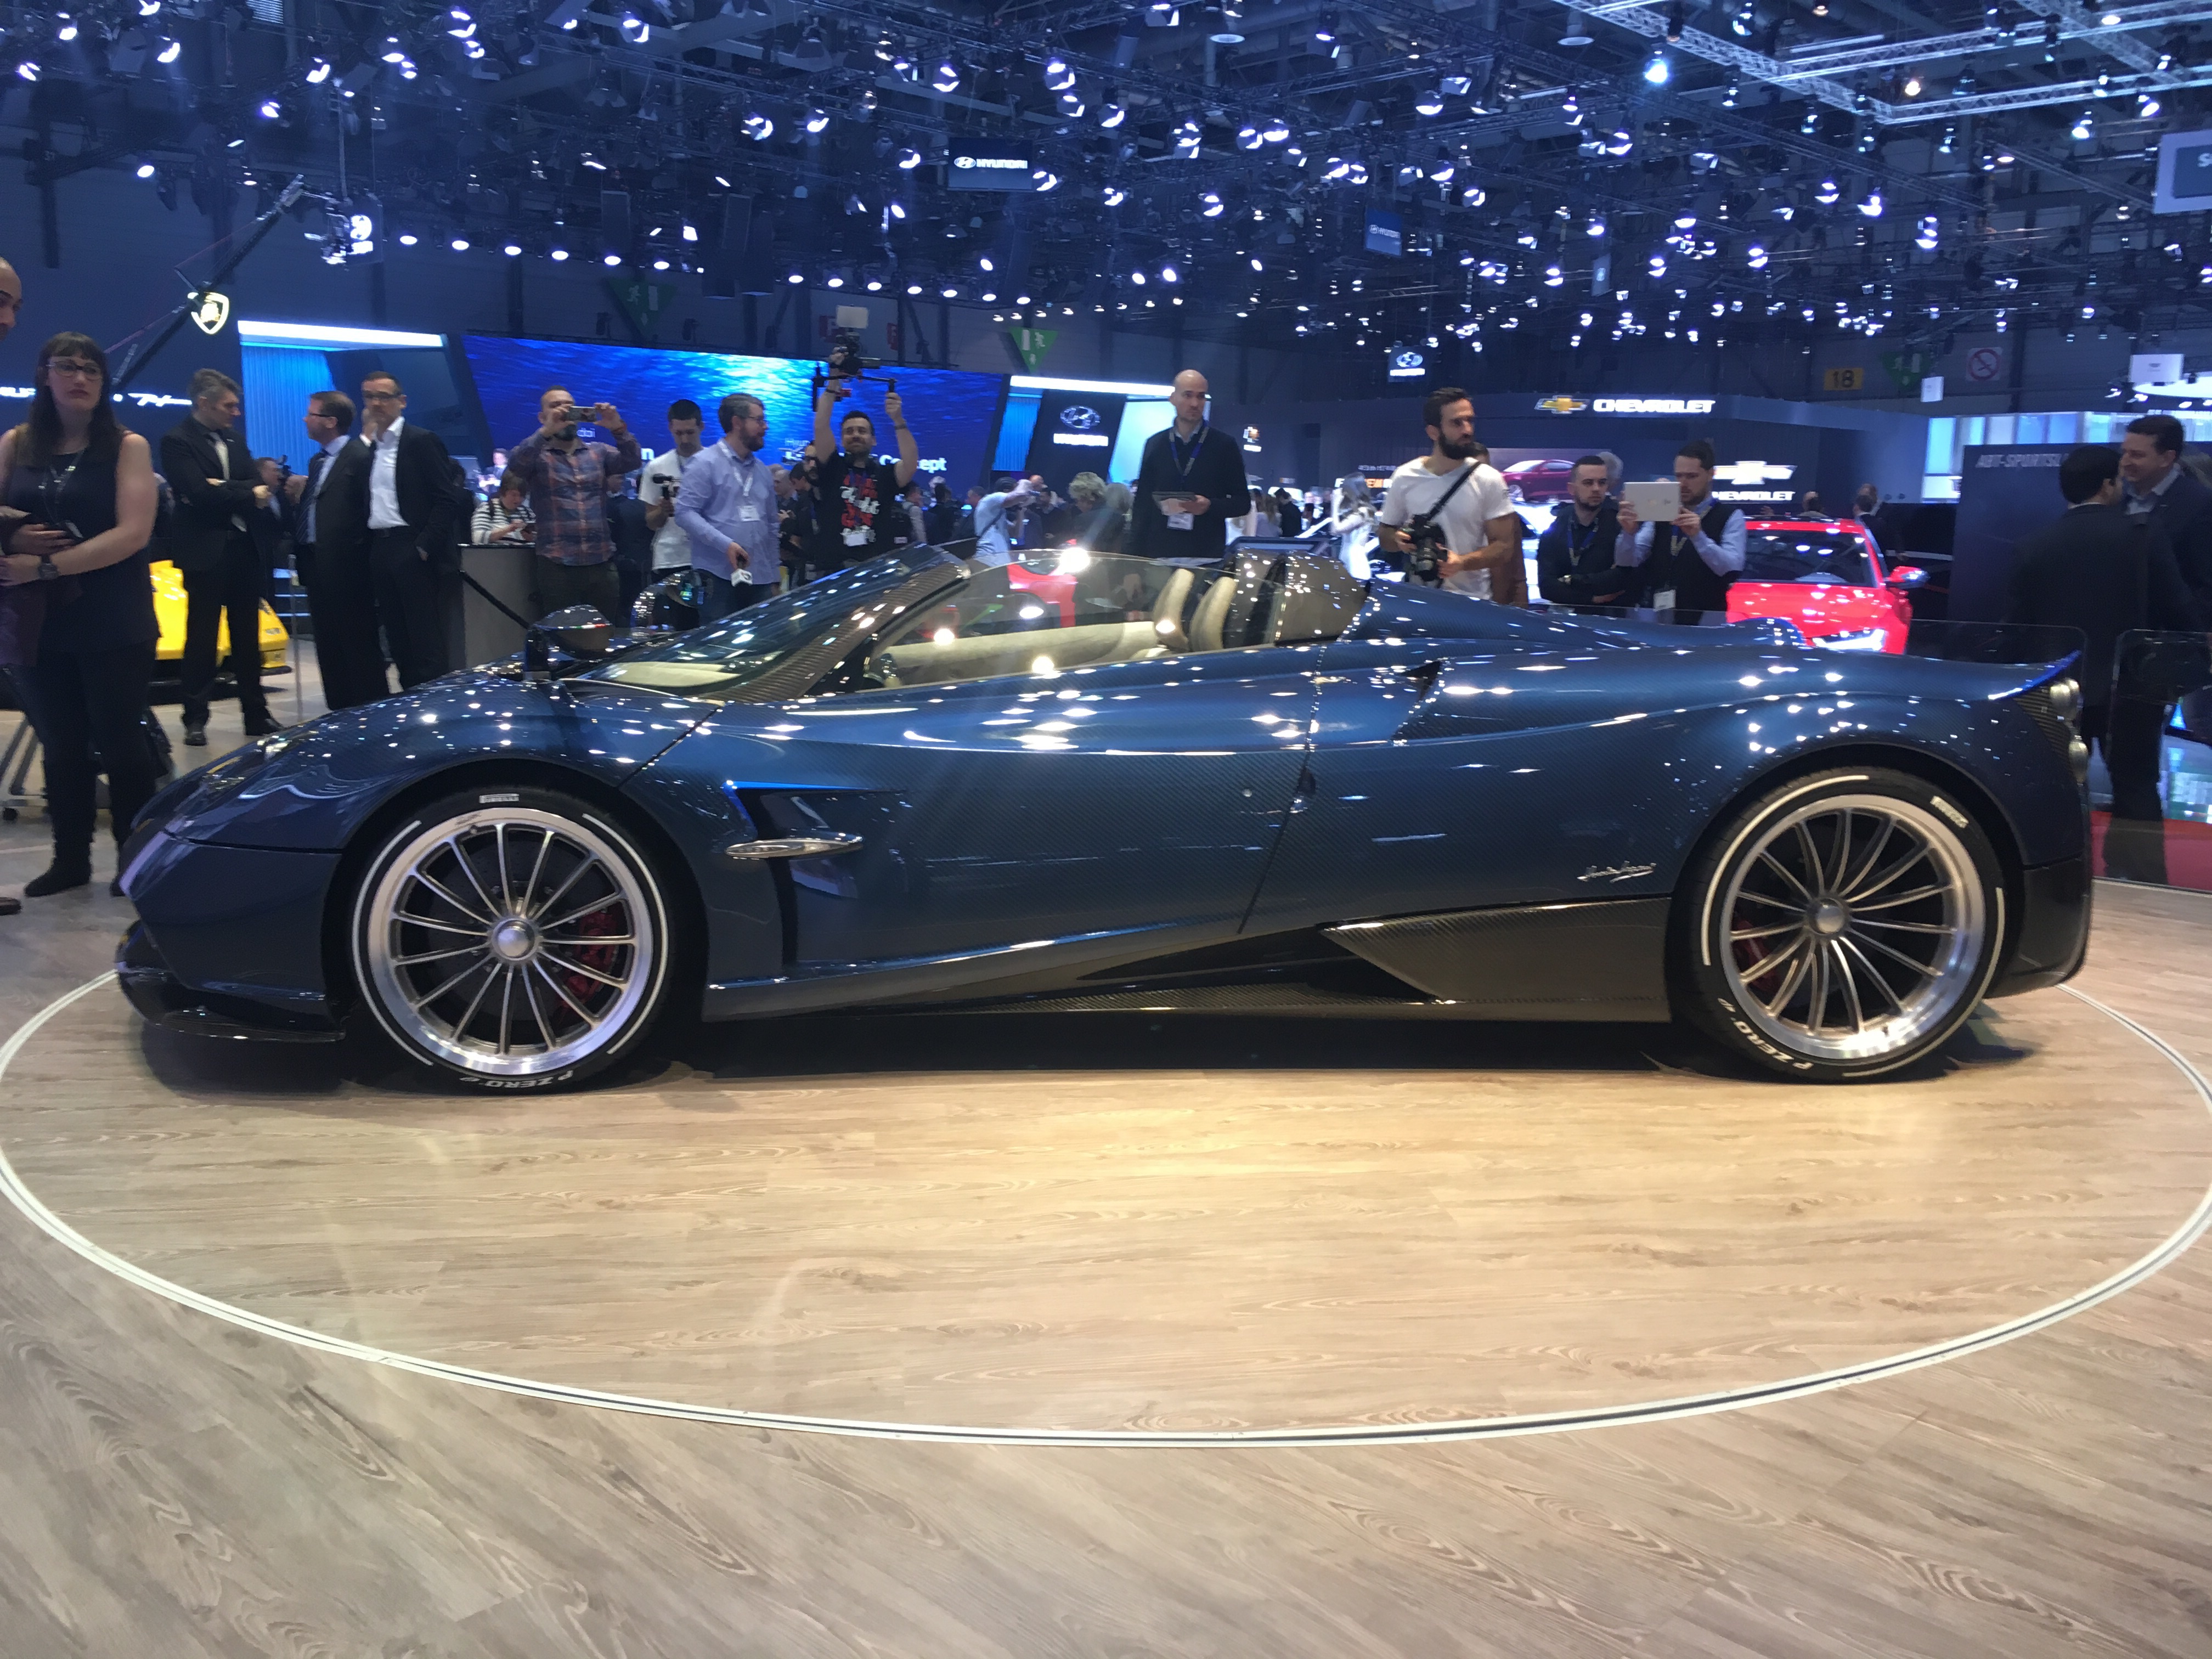 Pagani Huayra Roadster - Images from the Geneva motor show | evo